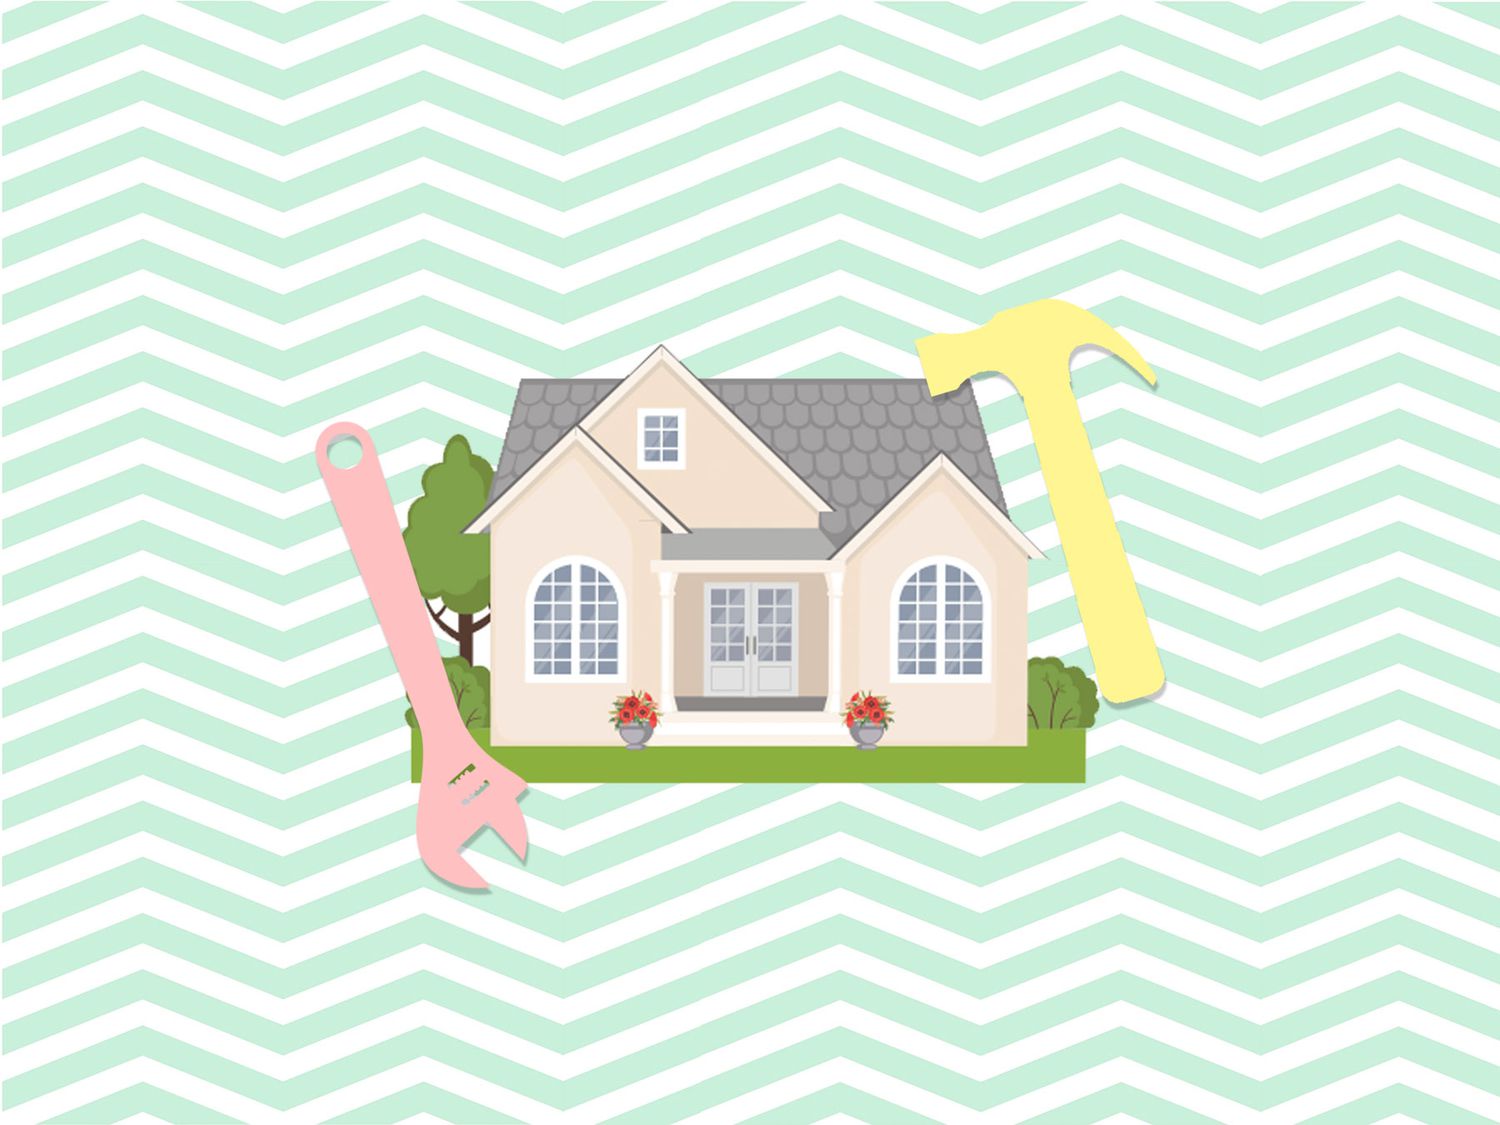 Should You Renovate Your Home All at Once or in Pieces? | Real Simple